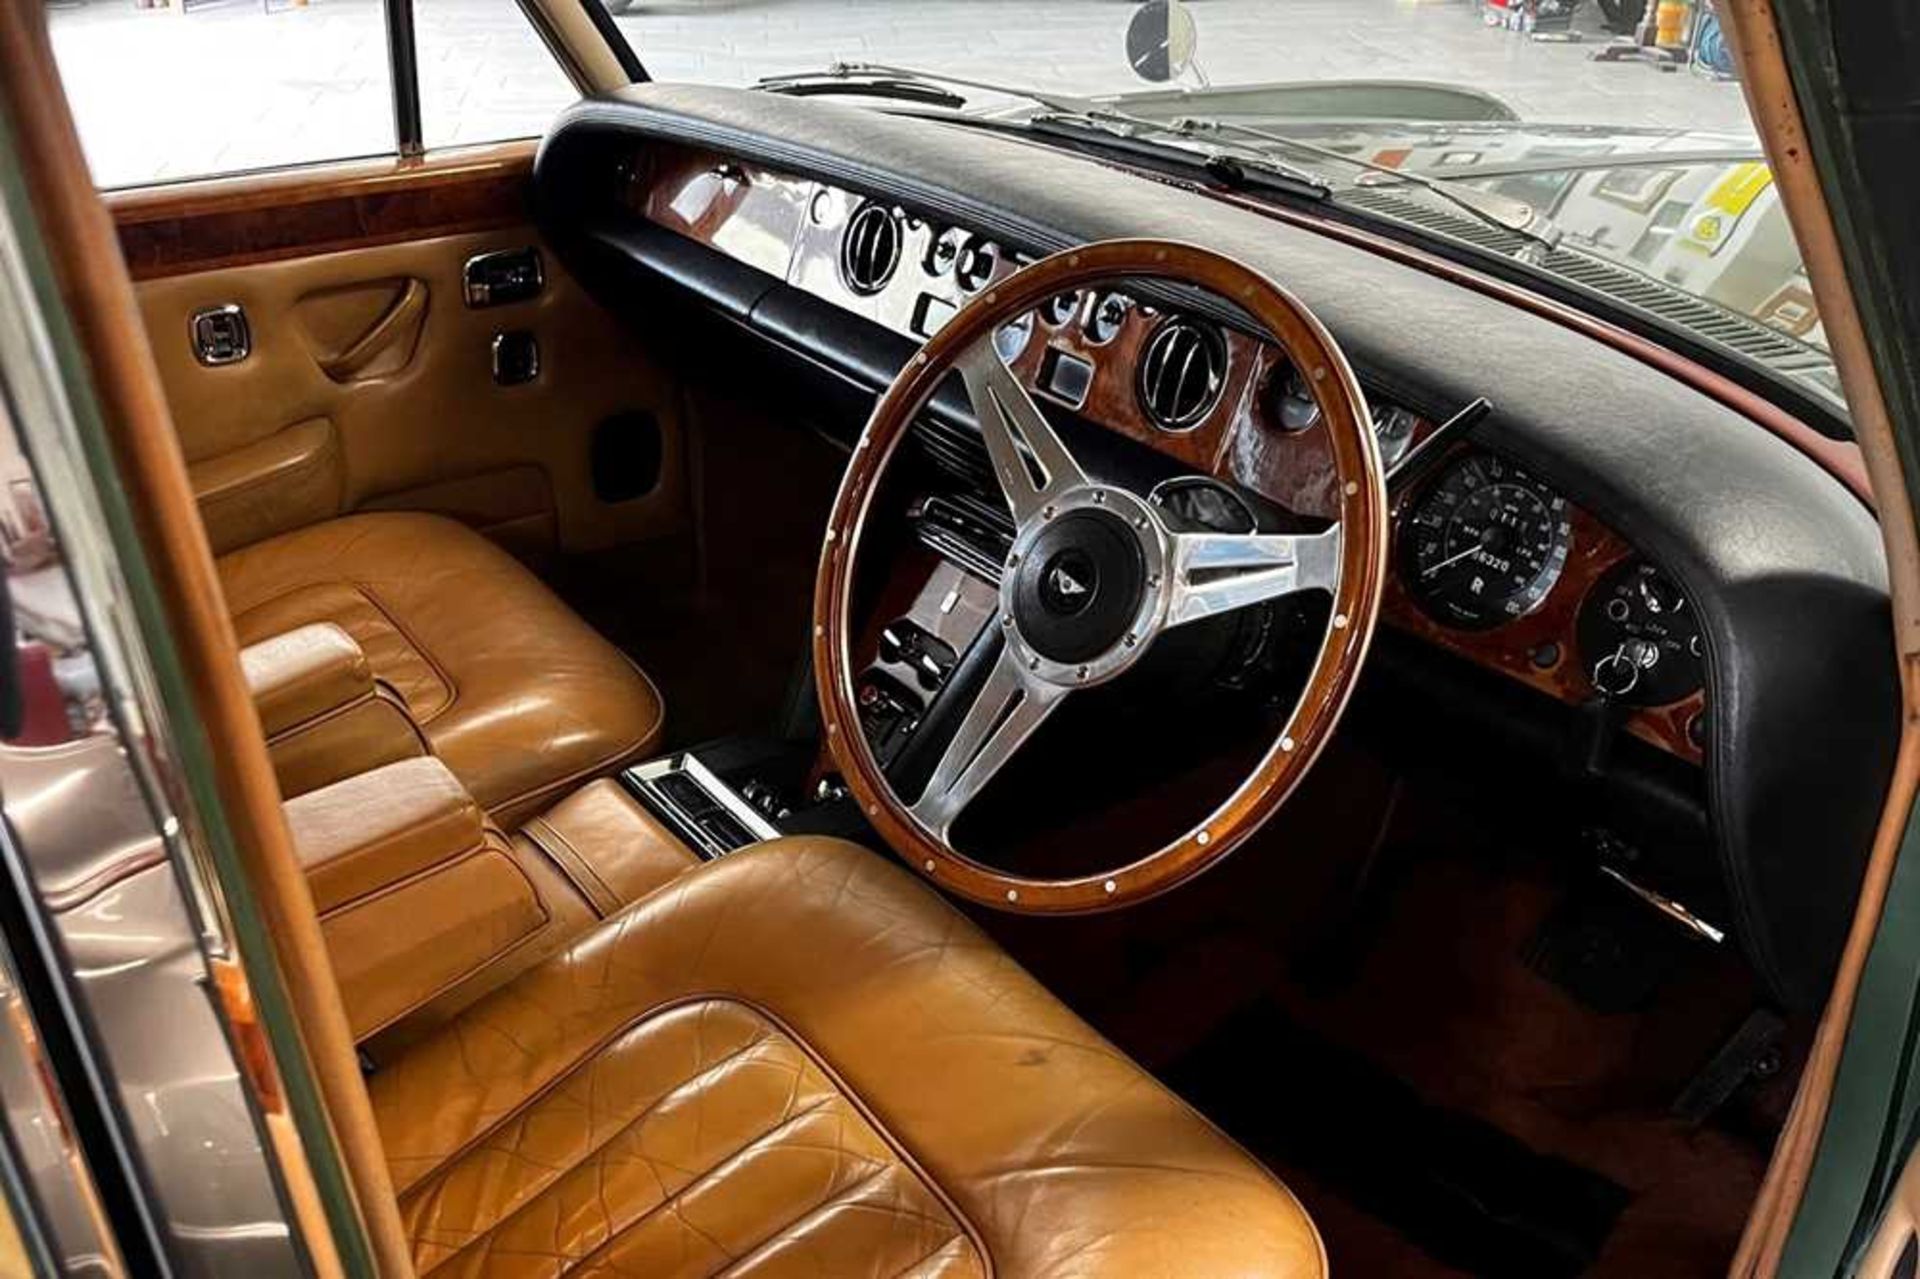 1973 Bentley T-Series Saloon Formerly part of the Dr James Hull and Jaguar Land Rover collections - Image 7 of 22